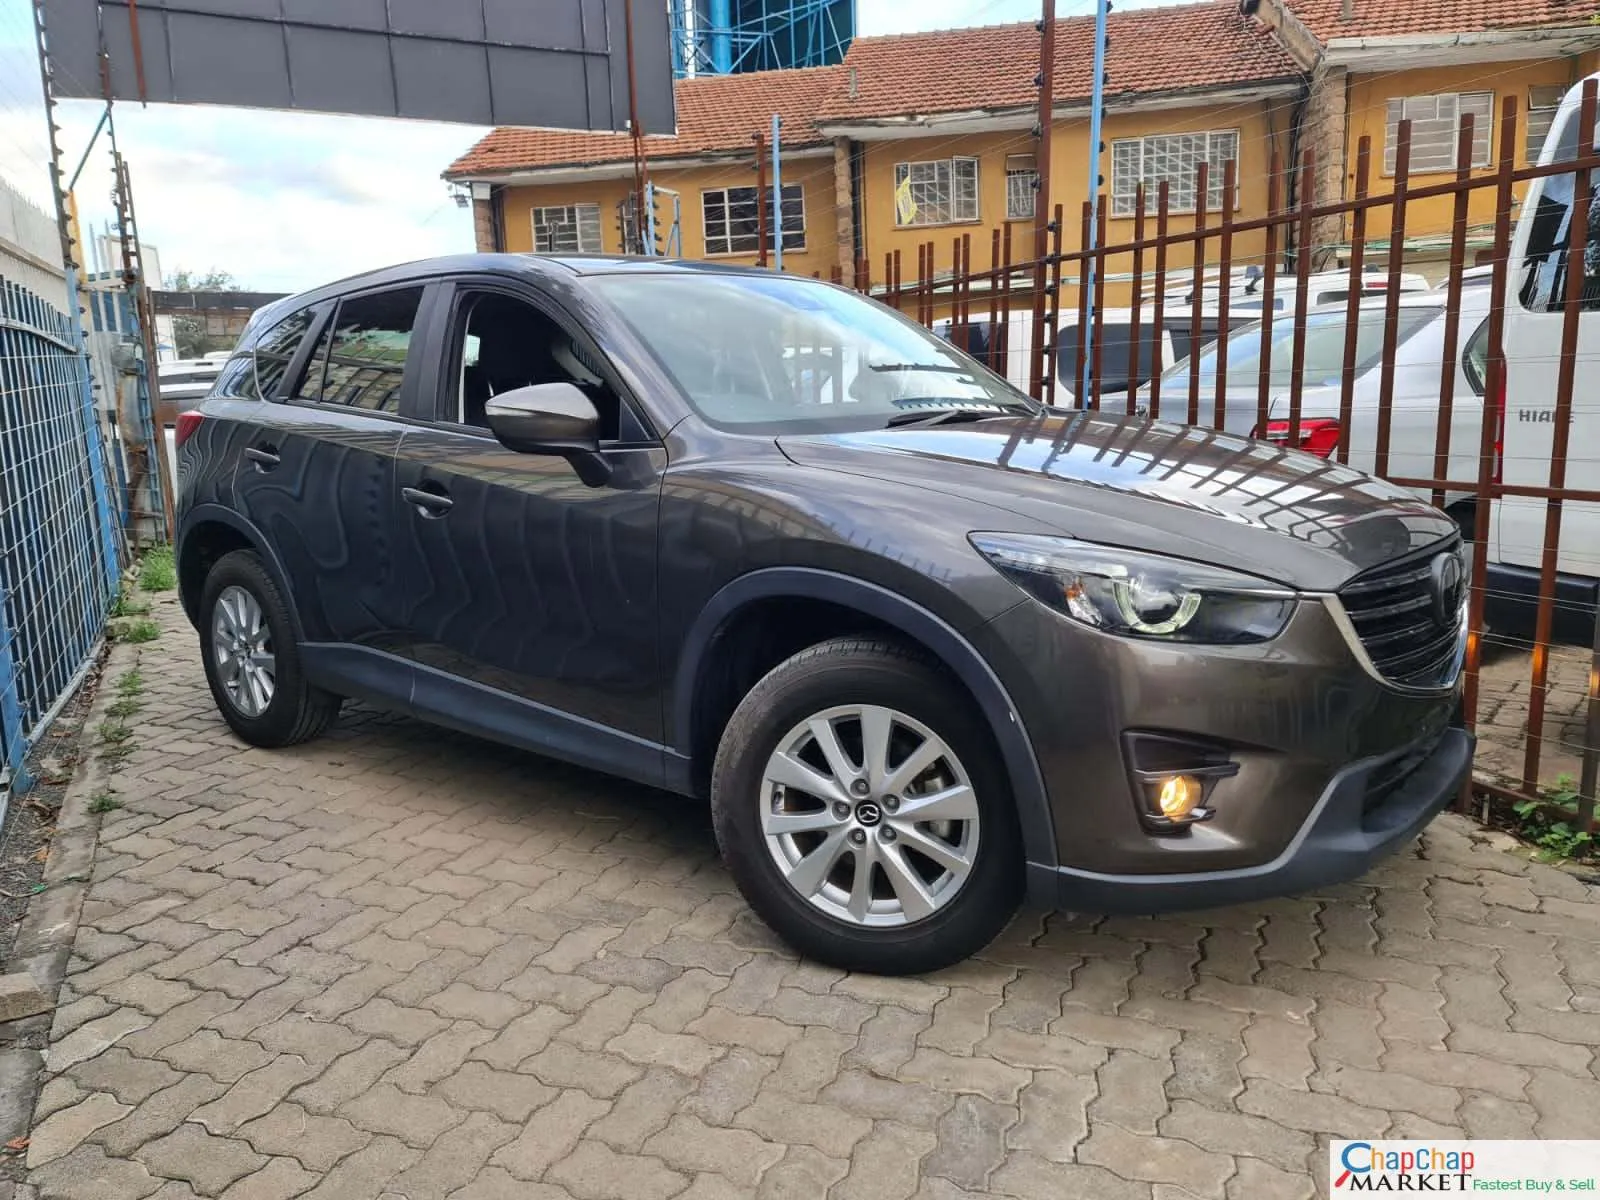 Cars Cars For Sale/Vehicles-Mazda CX-5 LATEST CHEAPEST You Pay 30% DEPOSIT TRADE IN OK EXCLUSIVE 9